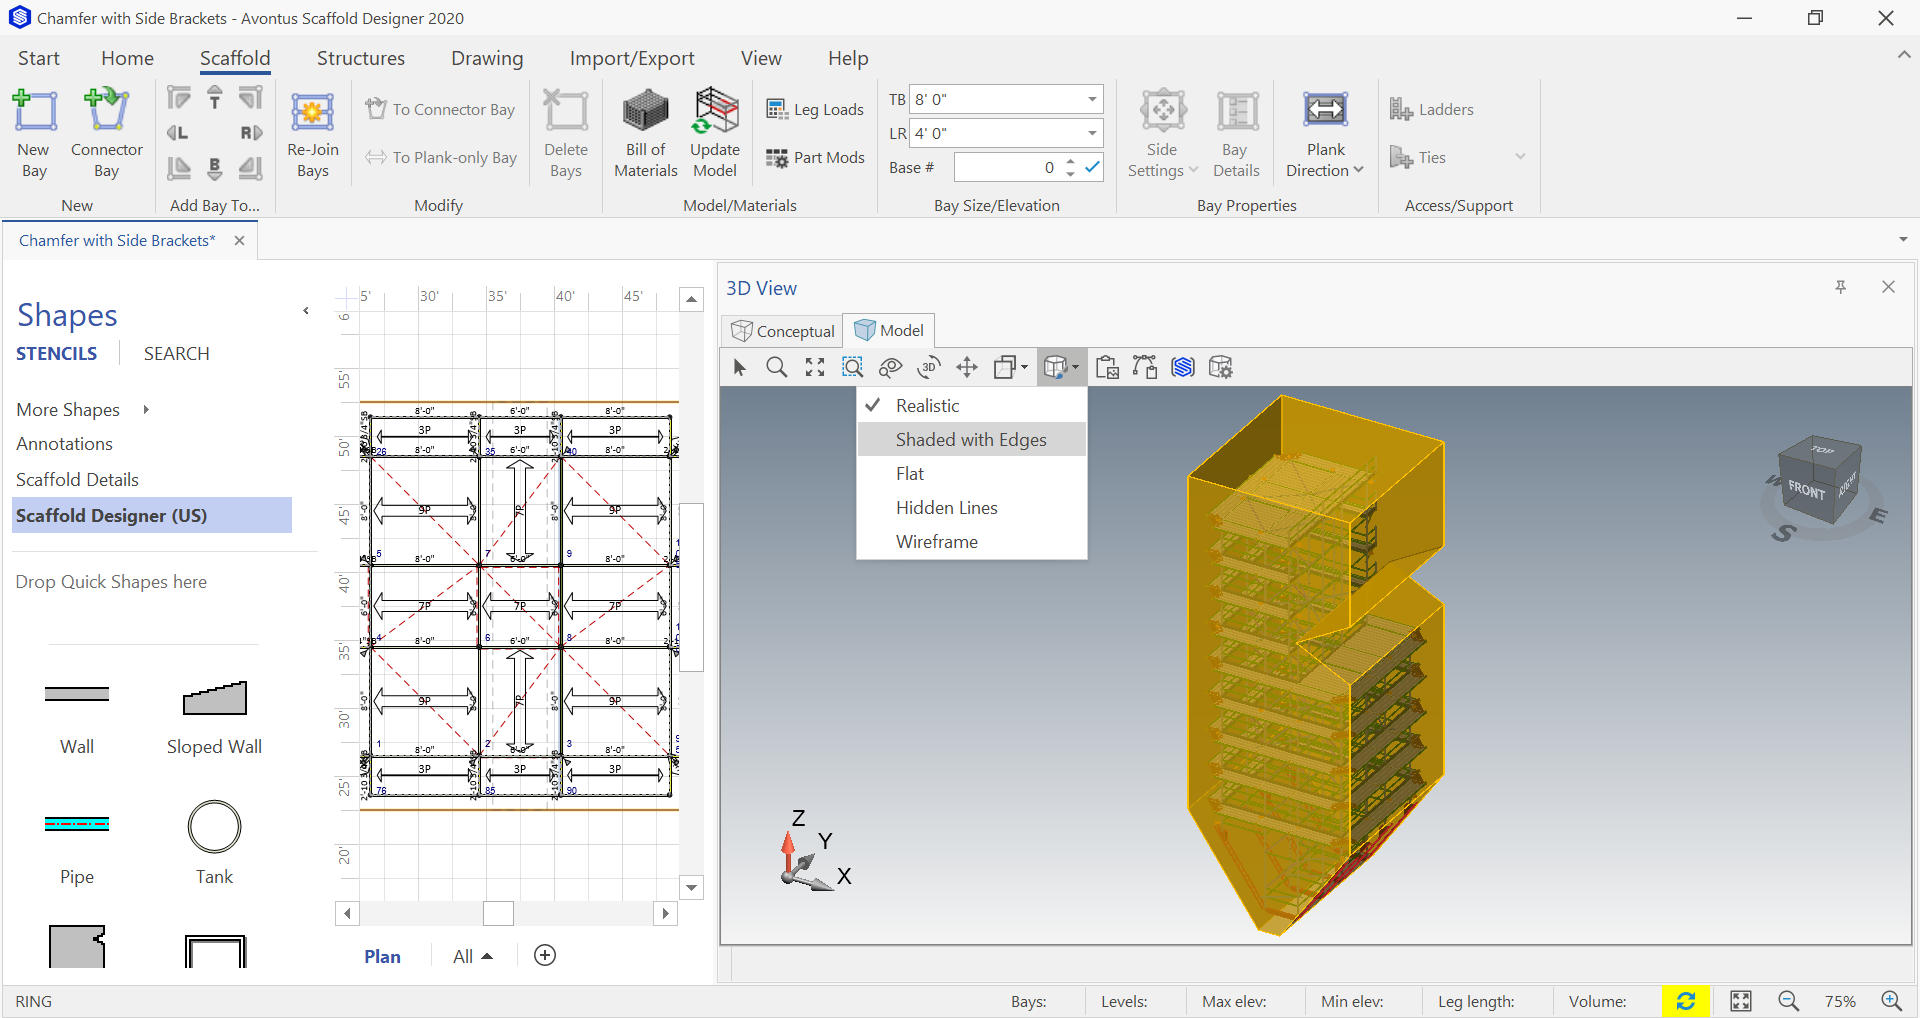 New shading modes are available with Scaffold Designer 2020 3D model view.